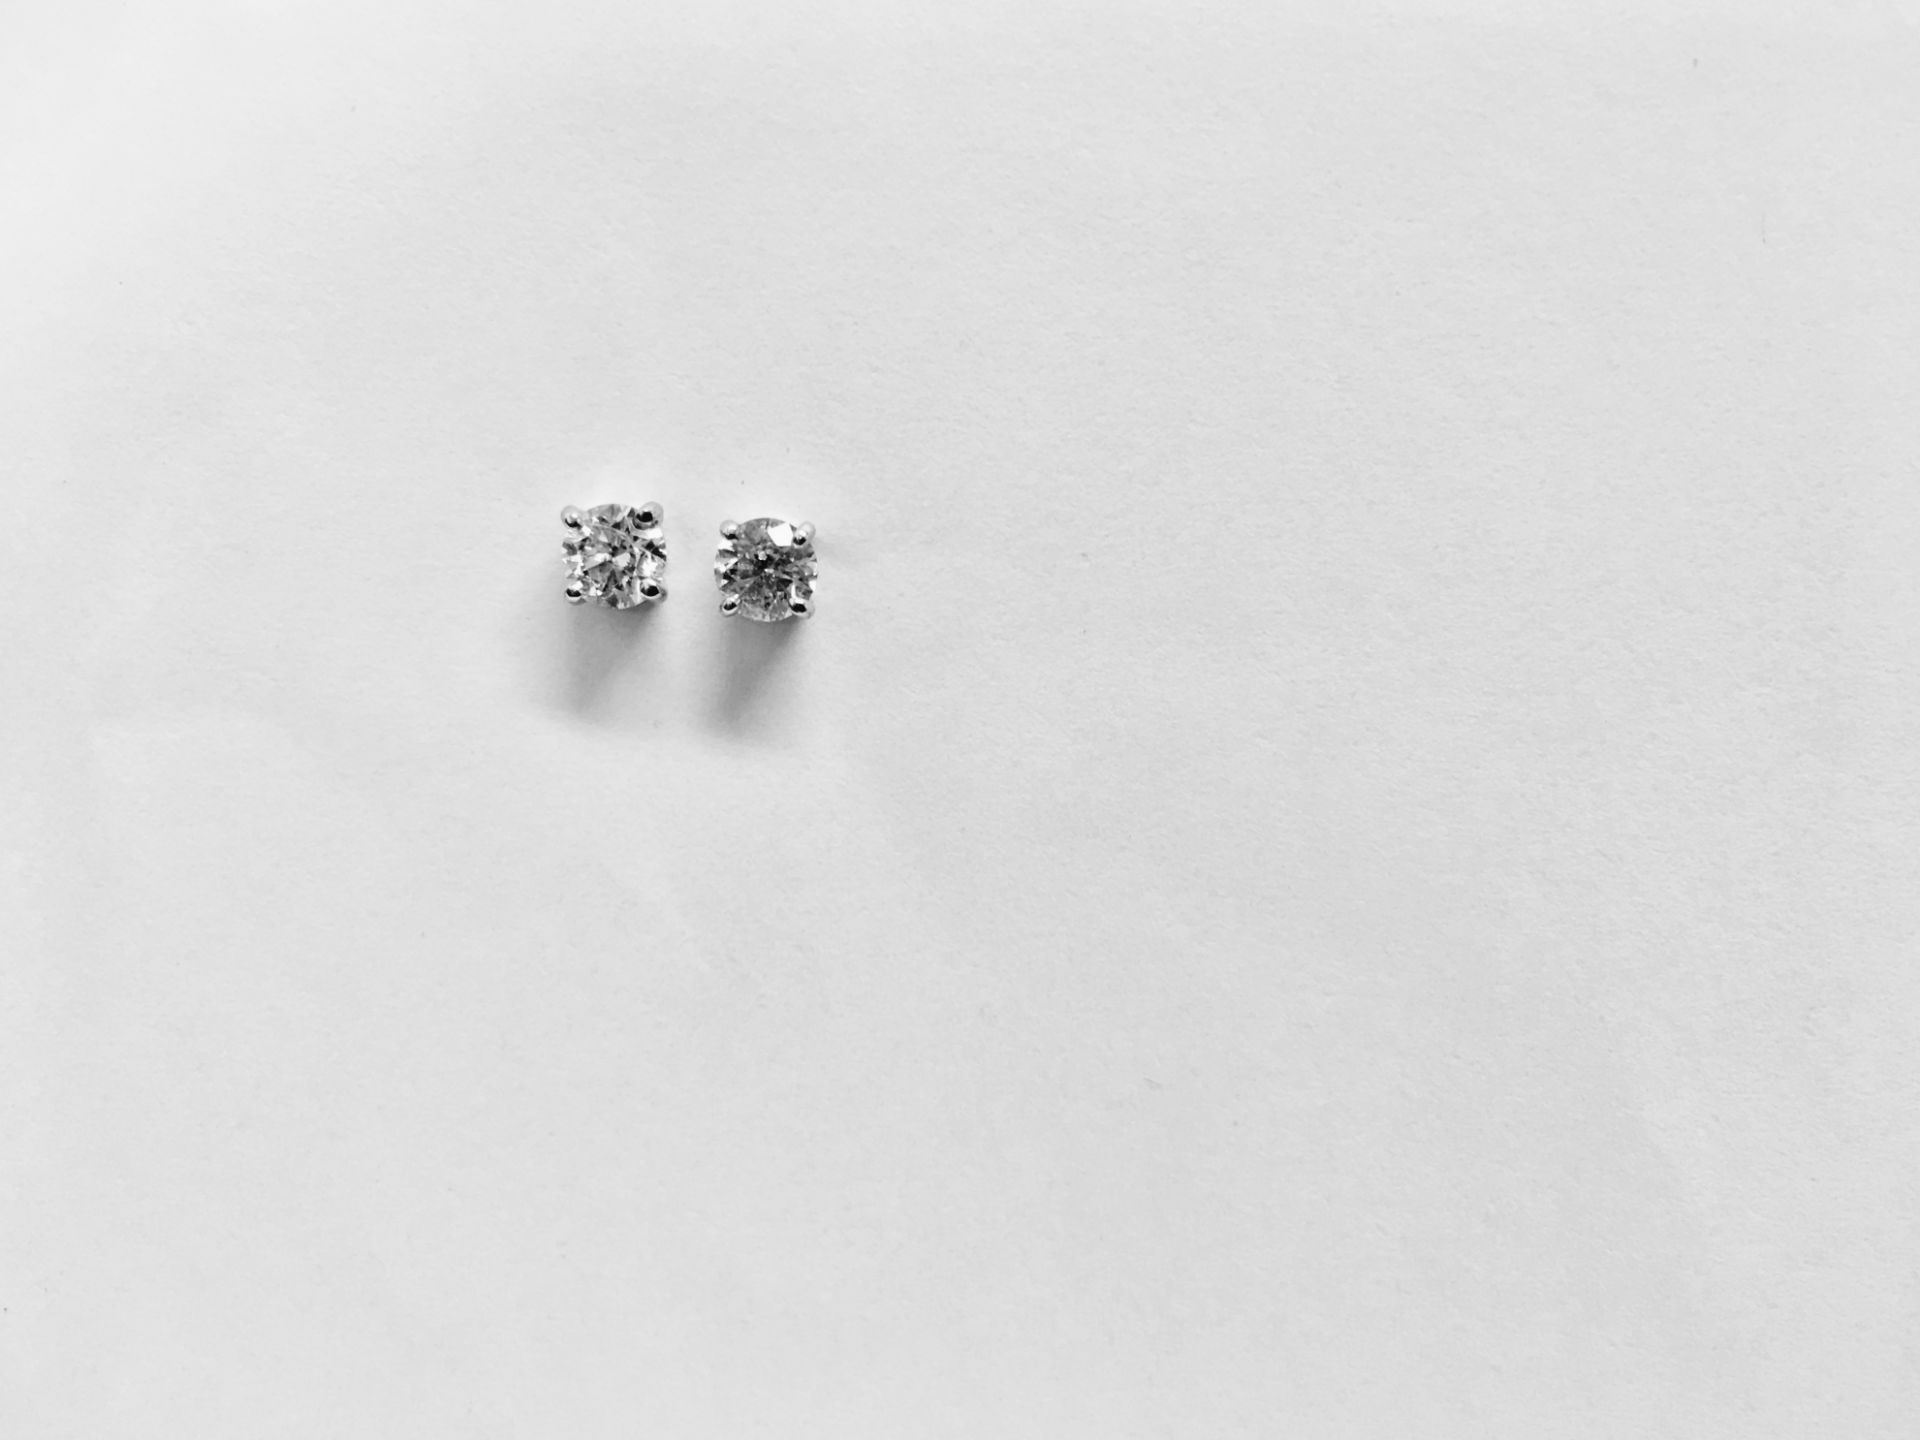 0.15ct Solitaire diamond stud earrings set with brilliant cut diamonds, i1 clarity and I colour. Set